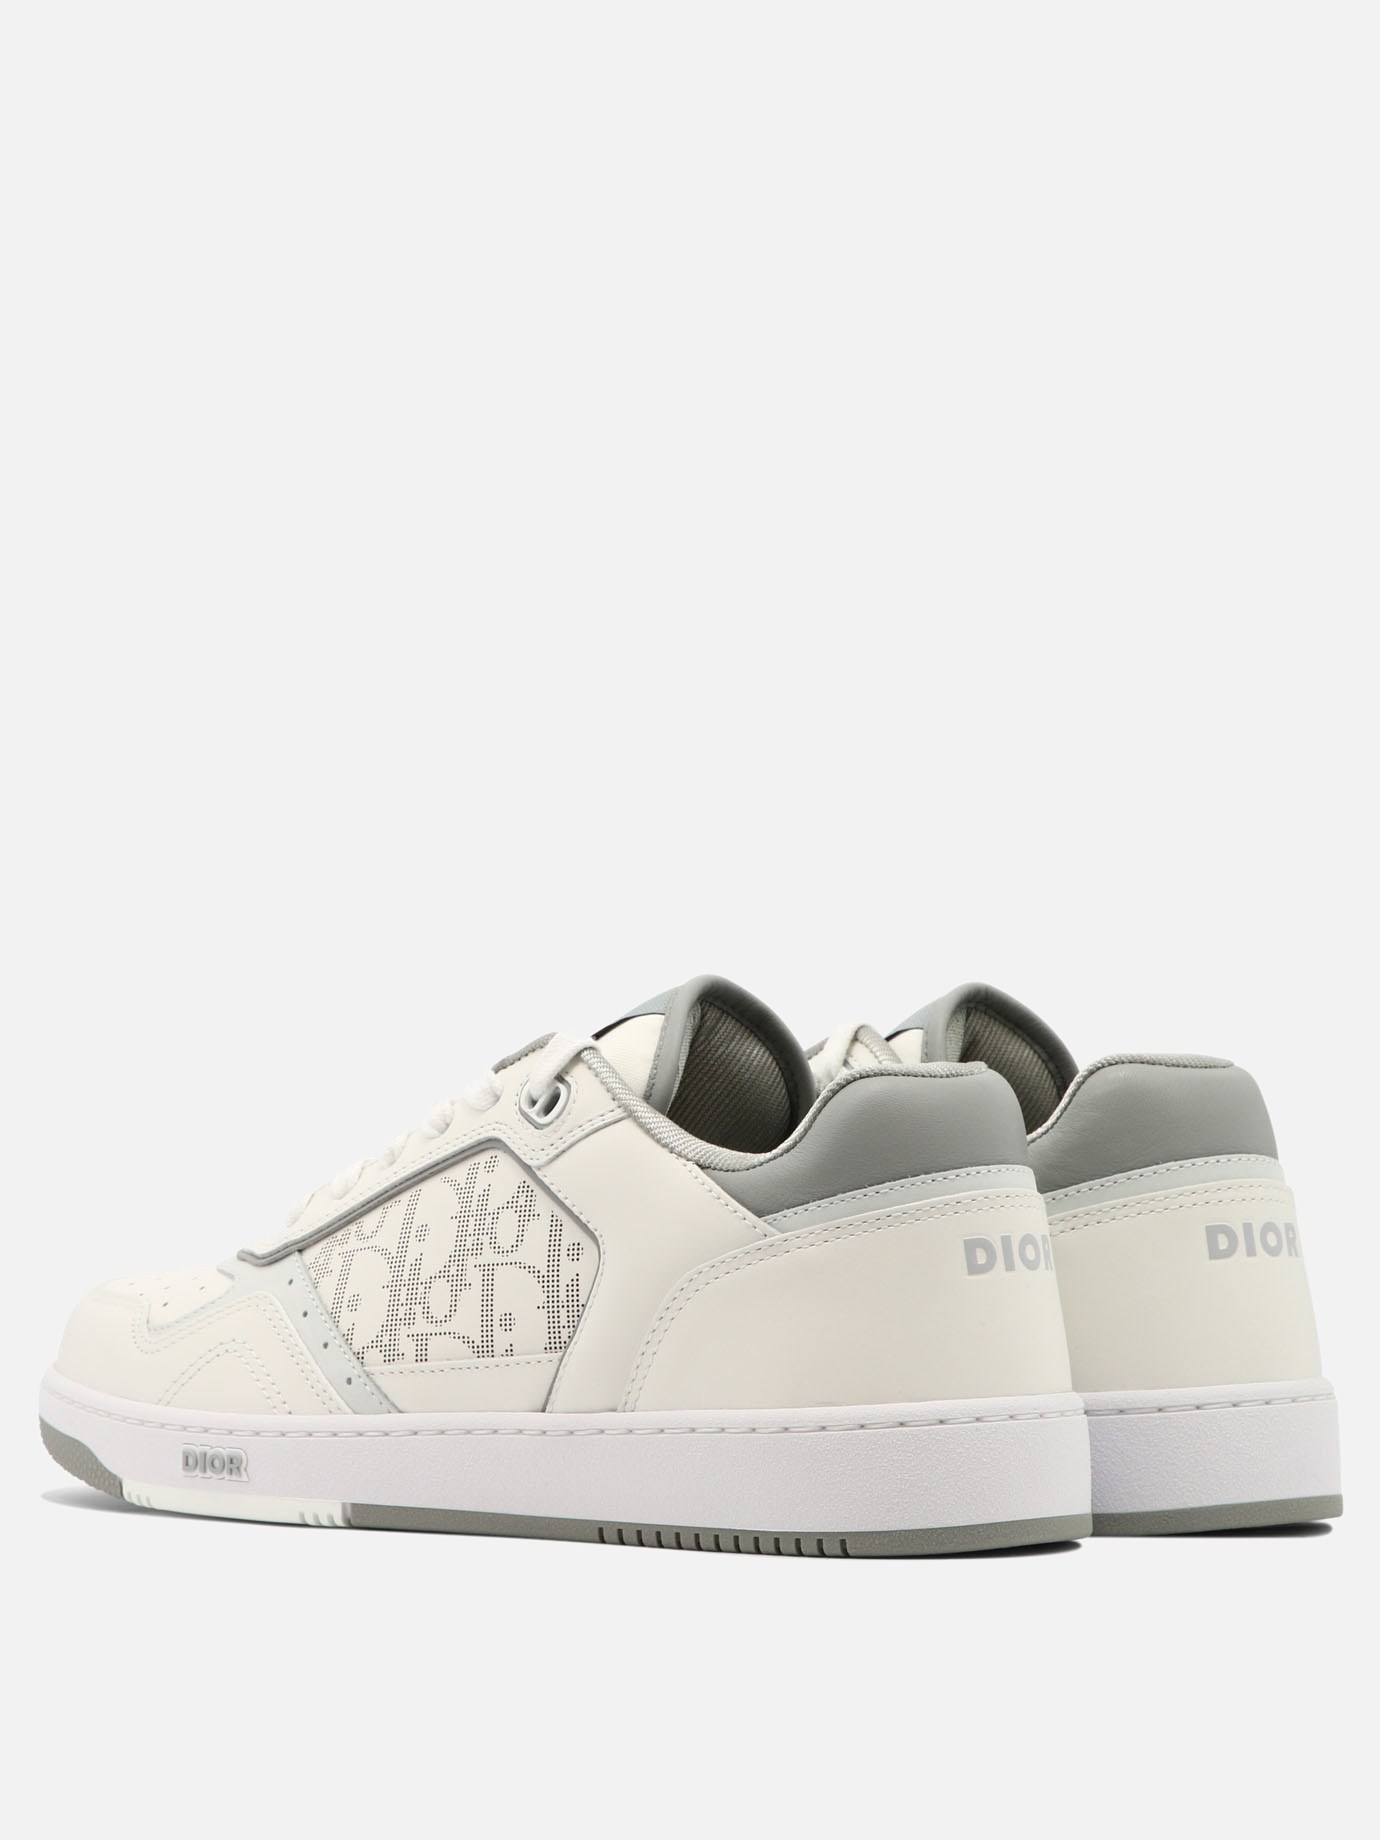  B27  sneakers by Dior